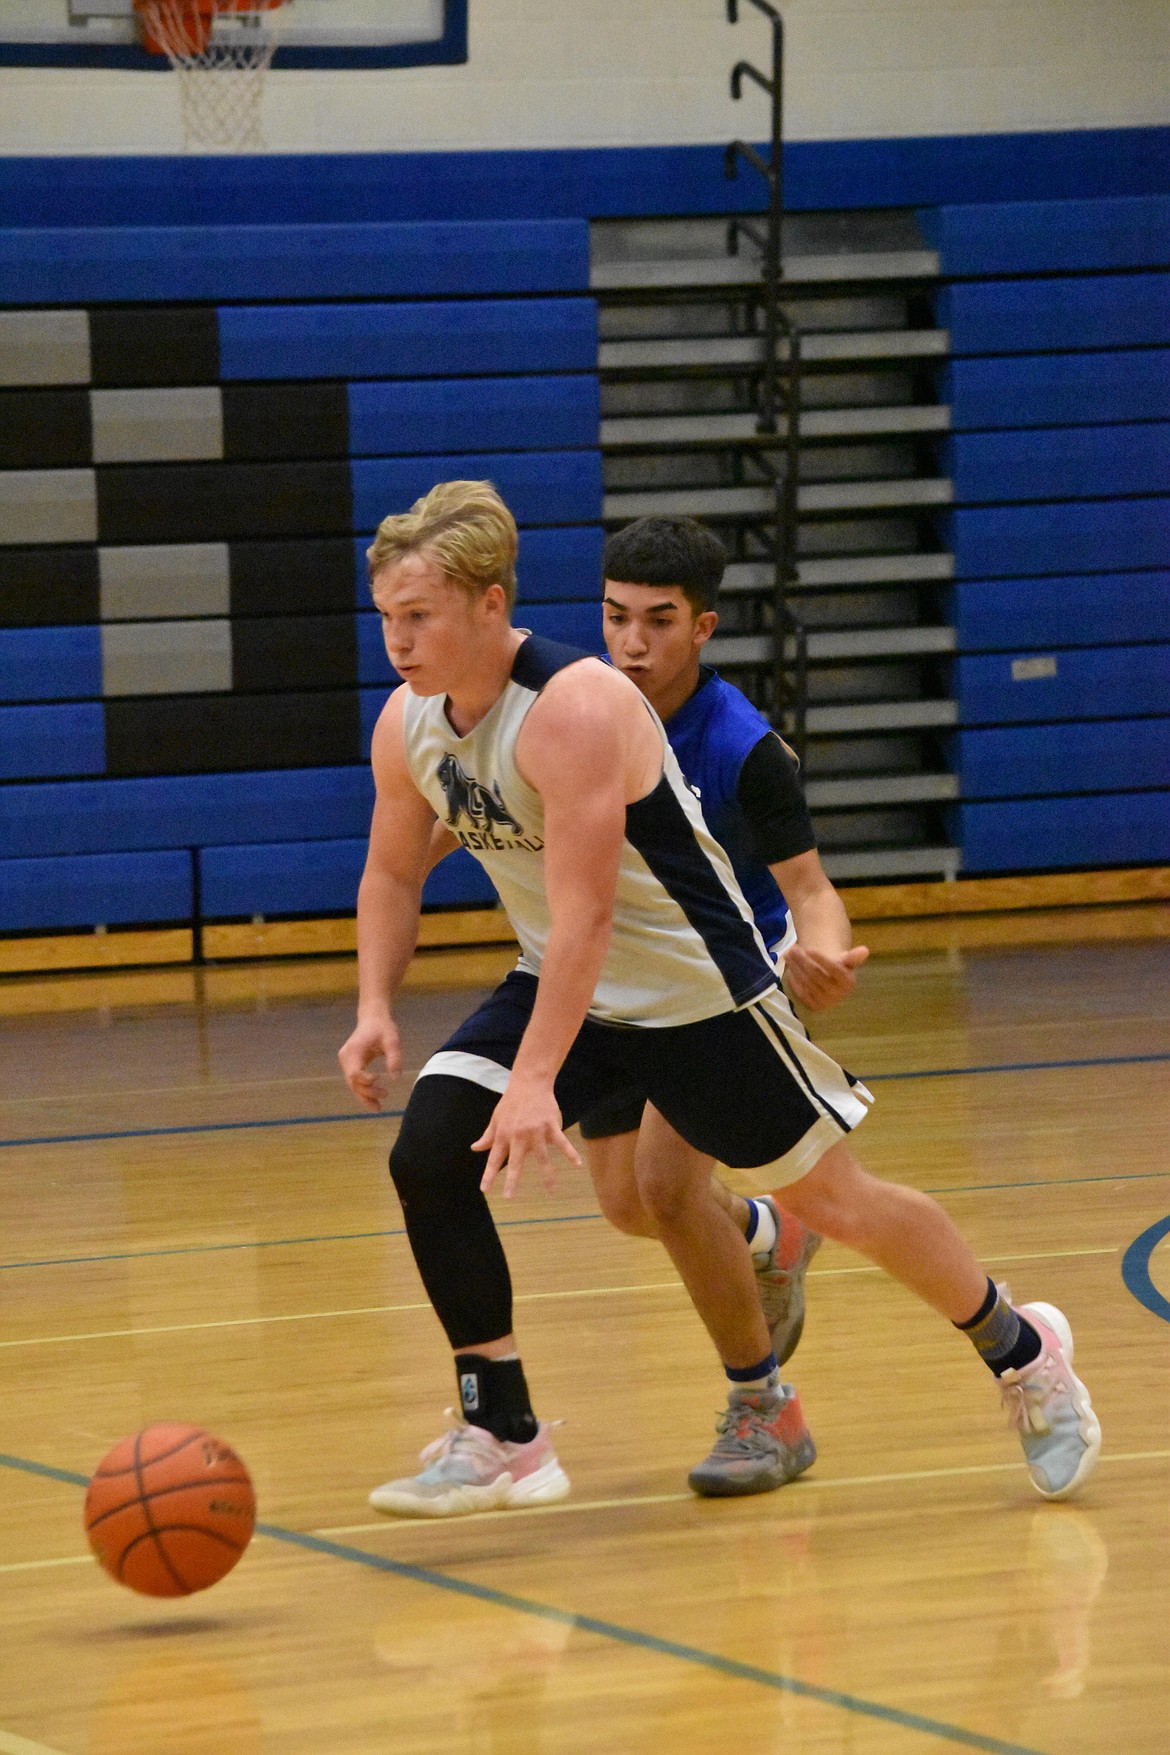 Some athletes participating in the summer league for their high schools are returning varsity players, such as Jonah Robertson for MLCA/CCS, while others are new and fresh faces.